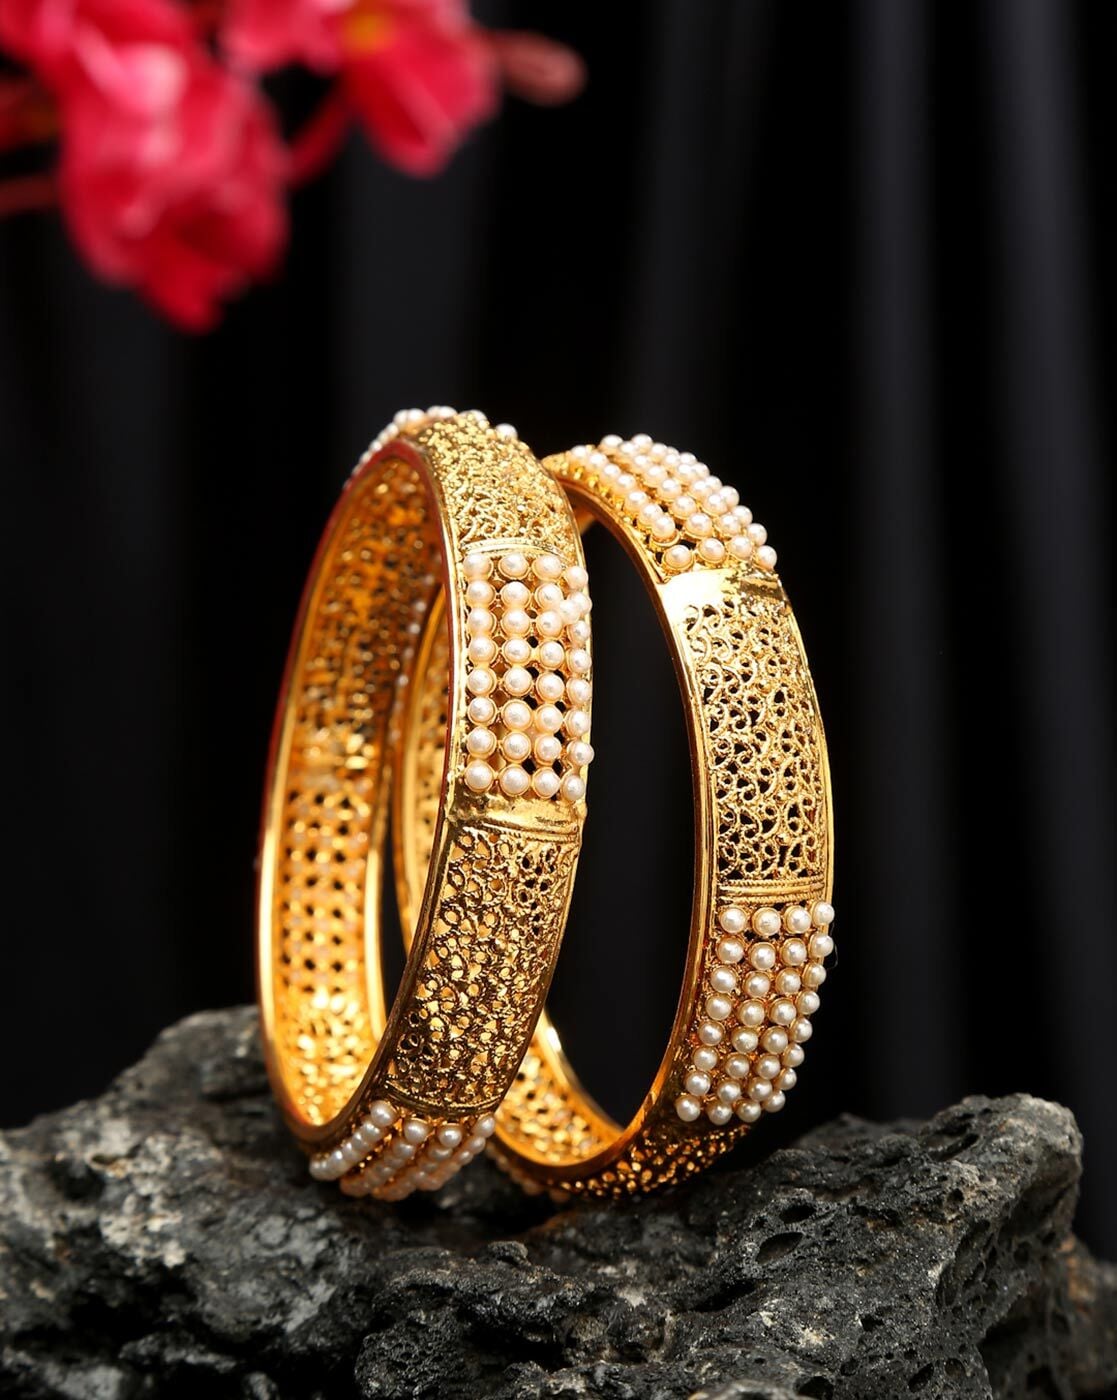 Buy Gold-Toned Bracelets & Bangles for Women by Youbella Online